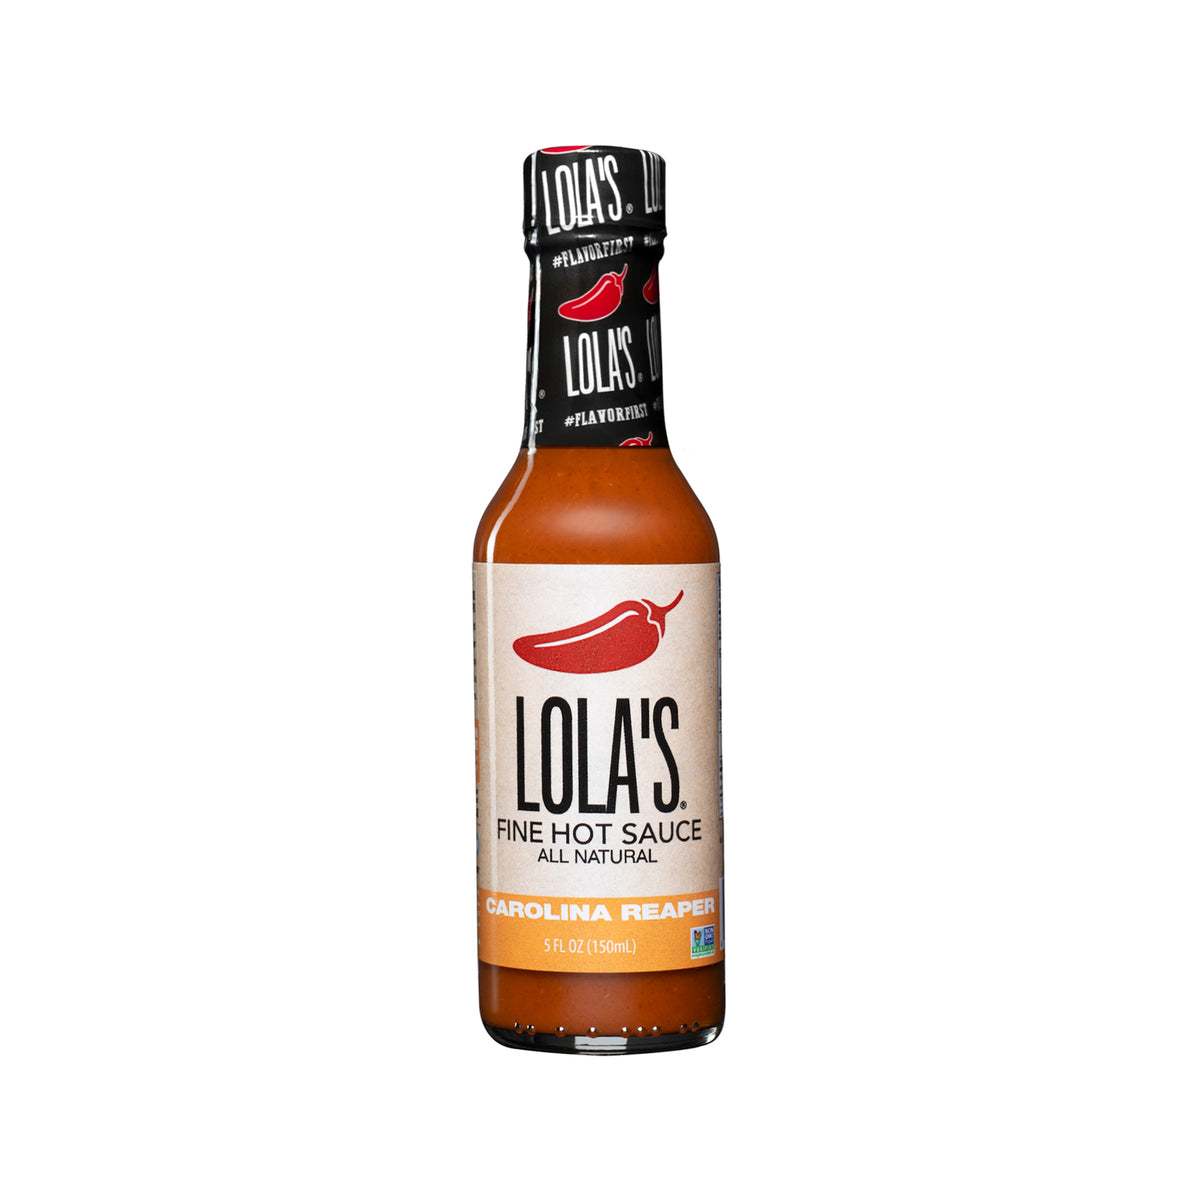 Lola's "Three Hit Wonders" Hot Sauce 3-Pack: A glass bottle of all-natural hot sauce trio - Trinidad Scorpion, Ghost Pepper, and Carolina Reaper.